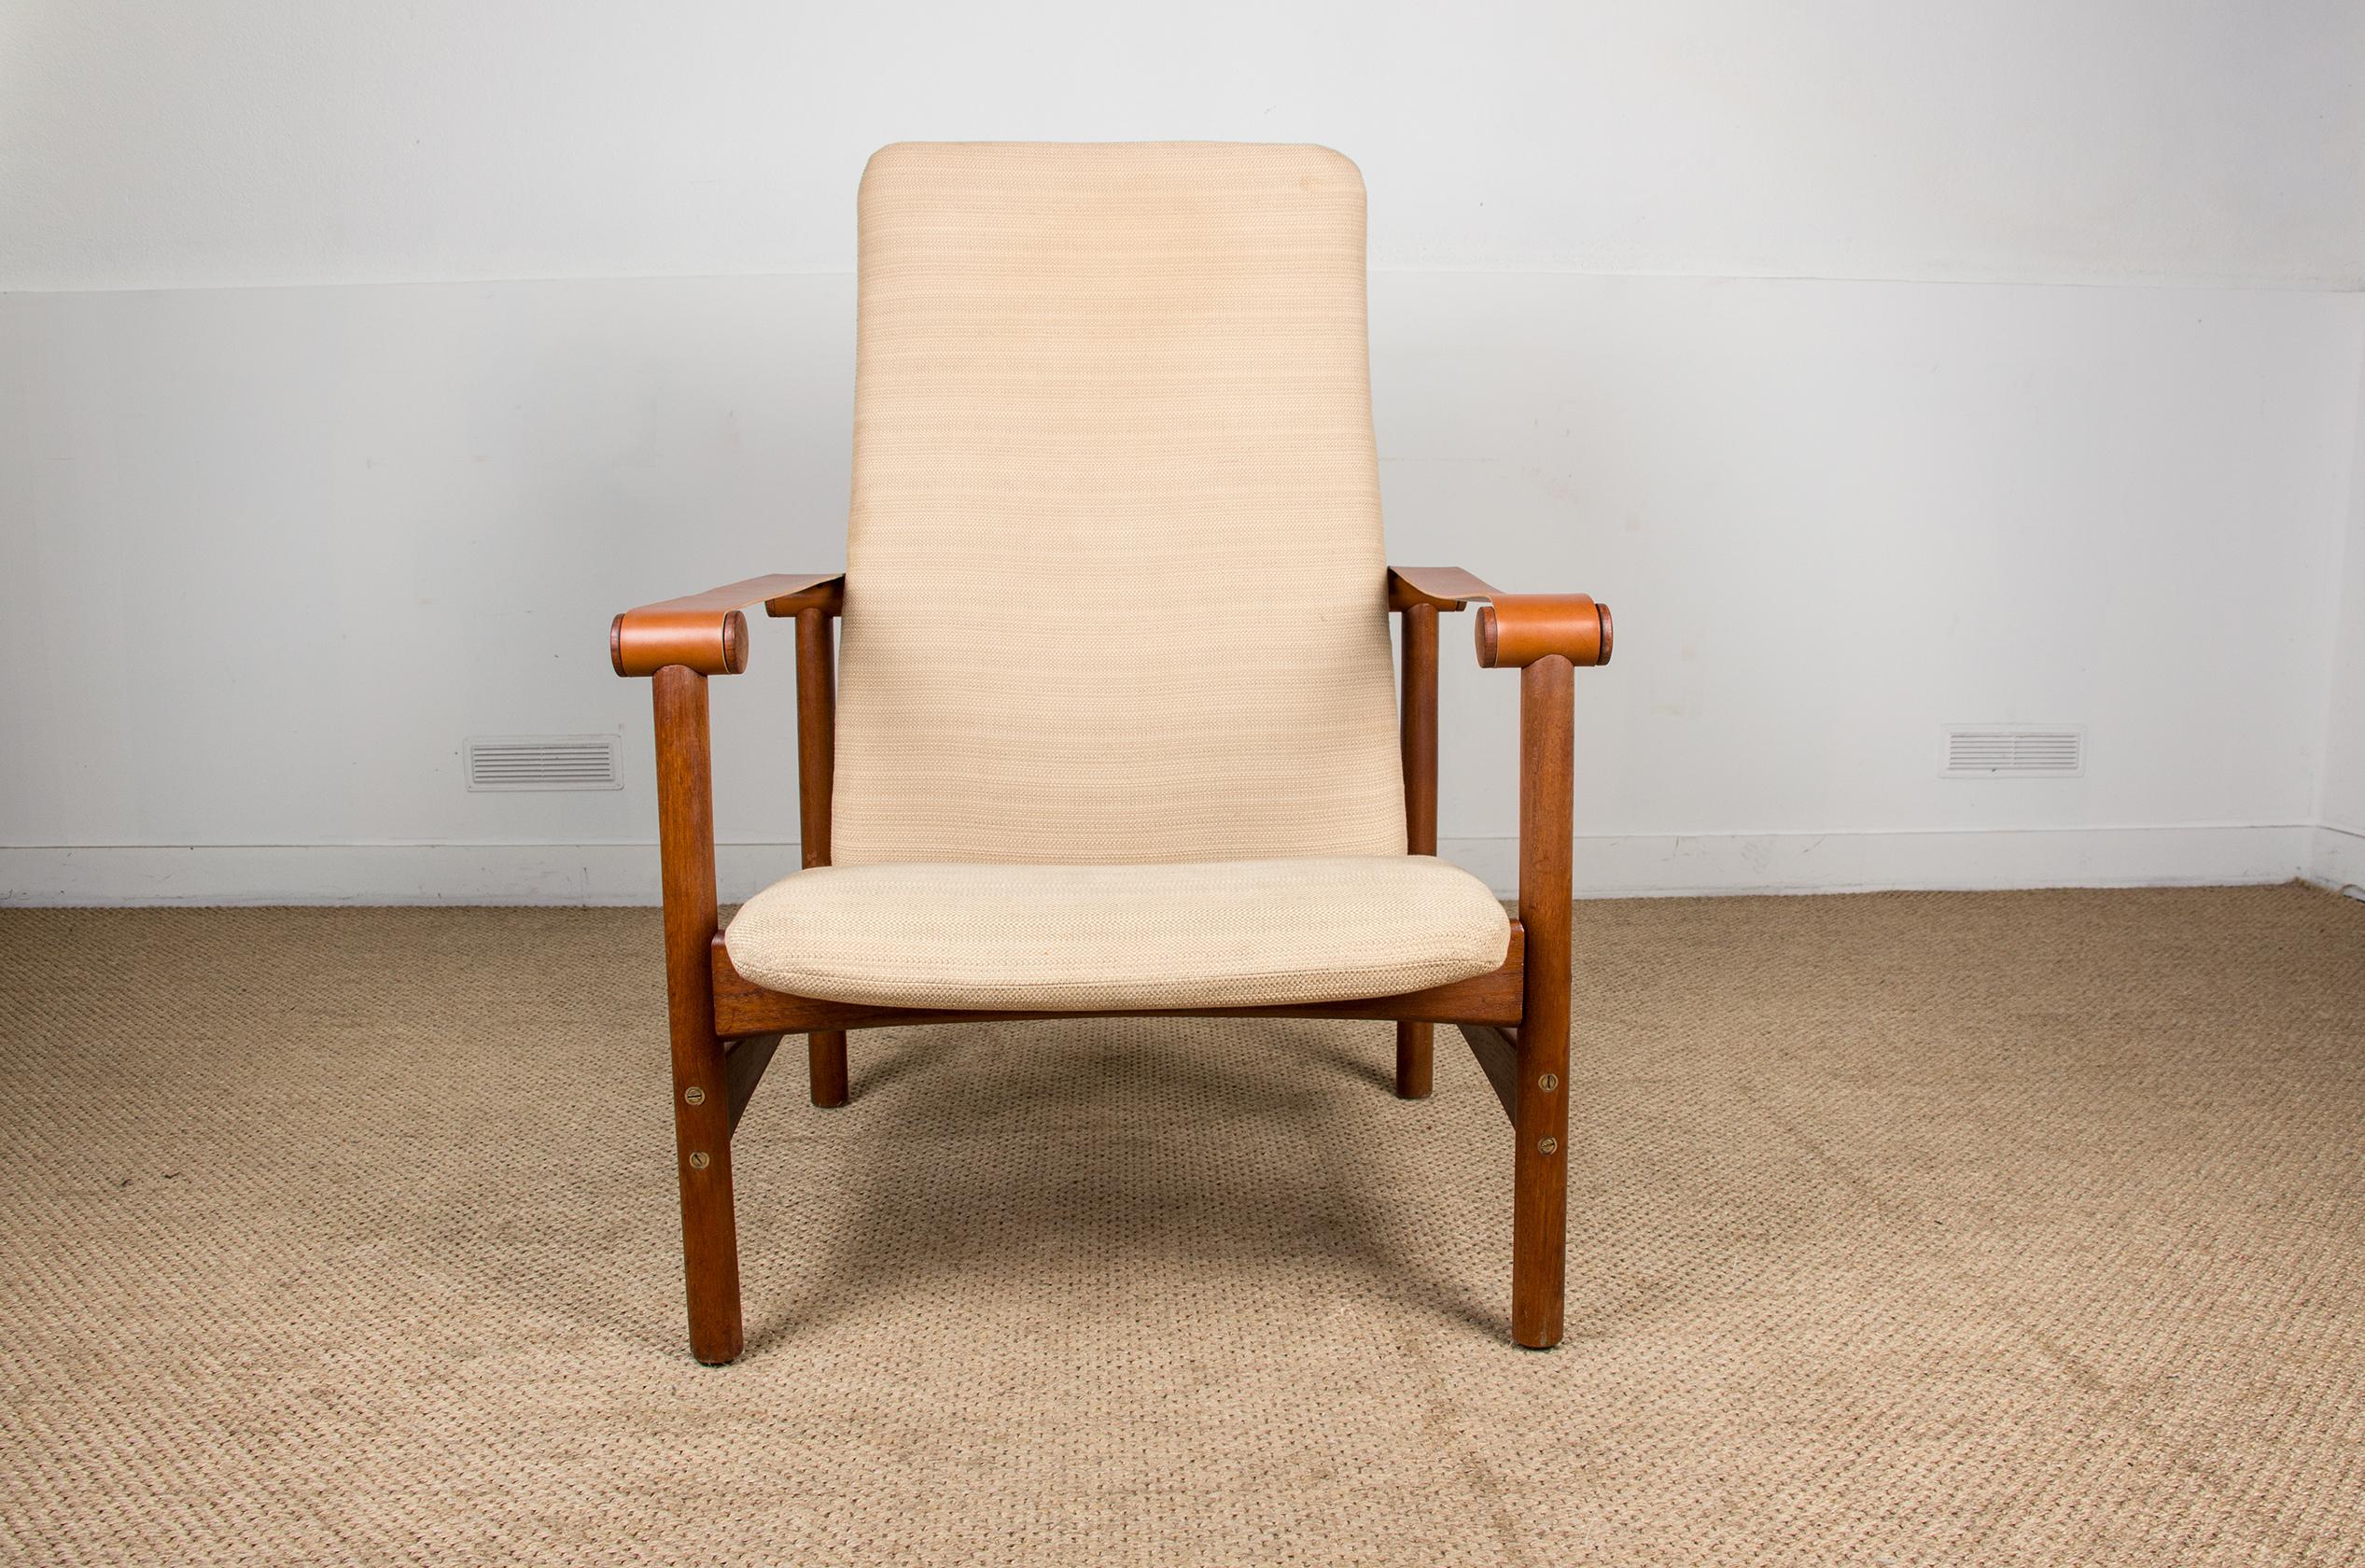 Amazing Scandinavian highback chair with refurbished leather armrests, brass screws and old teak woodwork. The seats are in excellent condition (new foam), the fabric can be changed to your liking. Very elegant, this piece of furniture is in the